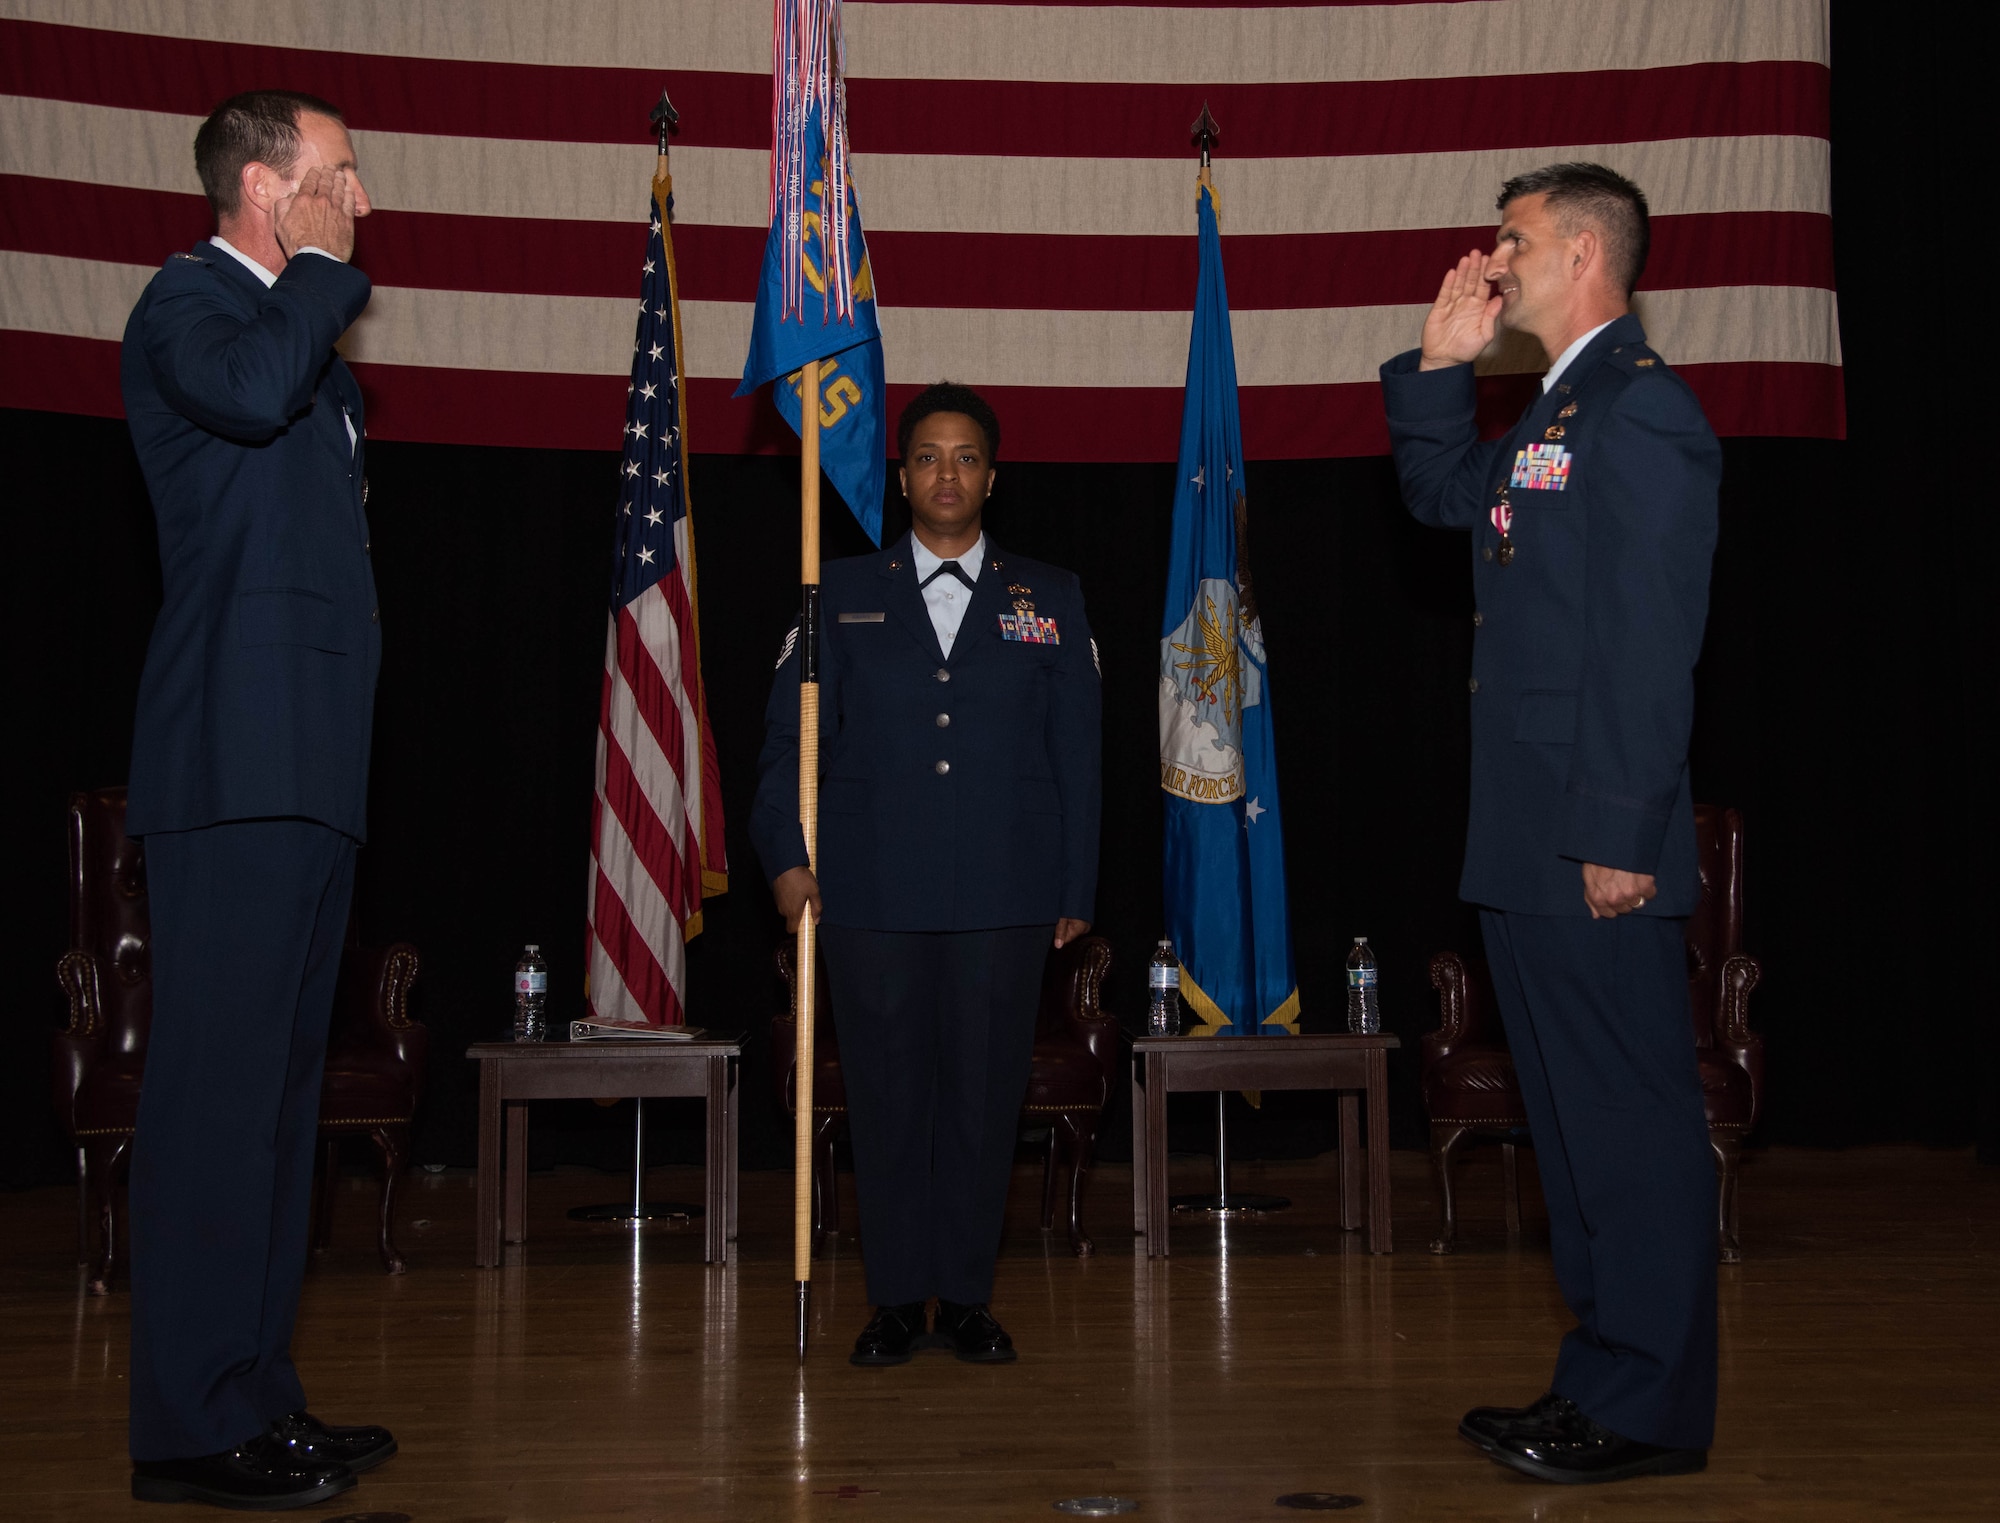 Maj. Michael Mealiff, 22nd Contracting Squadron outgoing commander, right, relinquishes command during a change of command ceremony June 18, 2020, at McConnell Air Force Base, Kansas. Mealiff served as the 22nd CONS commander for two years and will continue to serve at Maxwell Air Force Base, Alabama, where he will attend Air Command and Staff College. (U.S. Air Force photo by Airman 1st Class Marc A. Garcia)